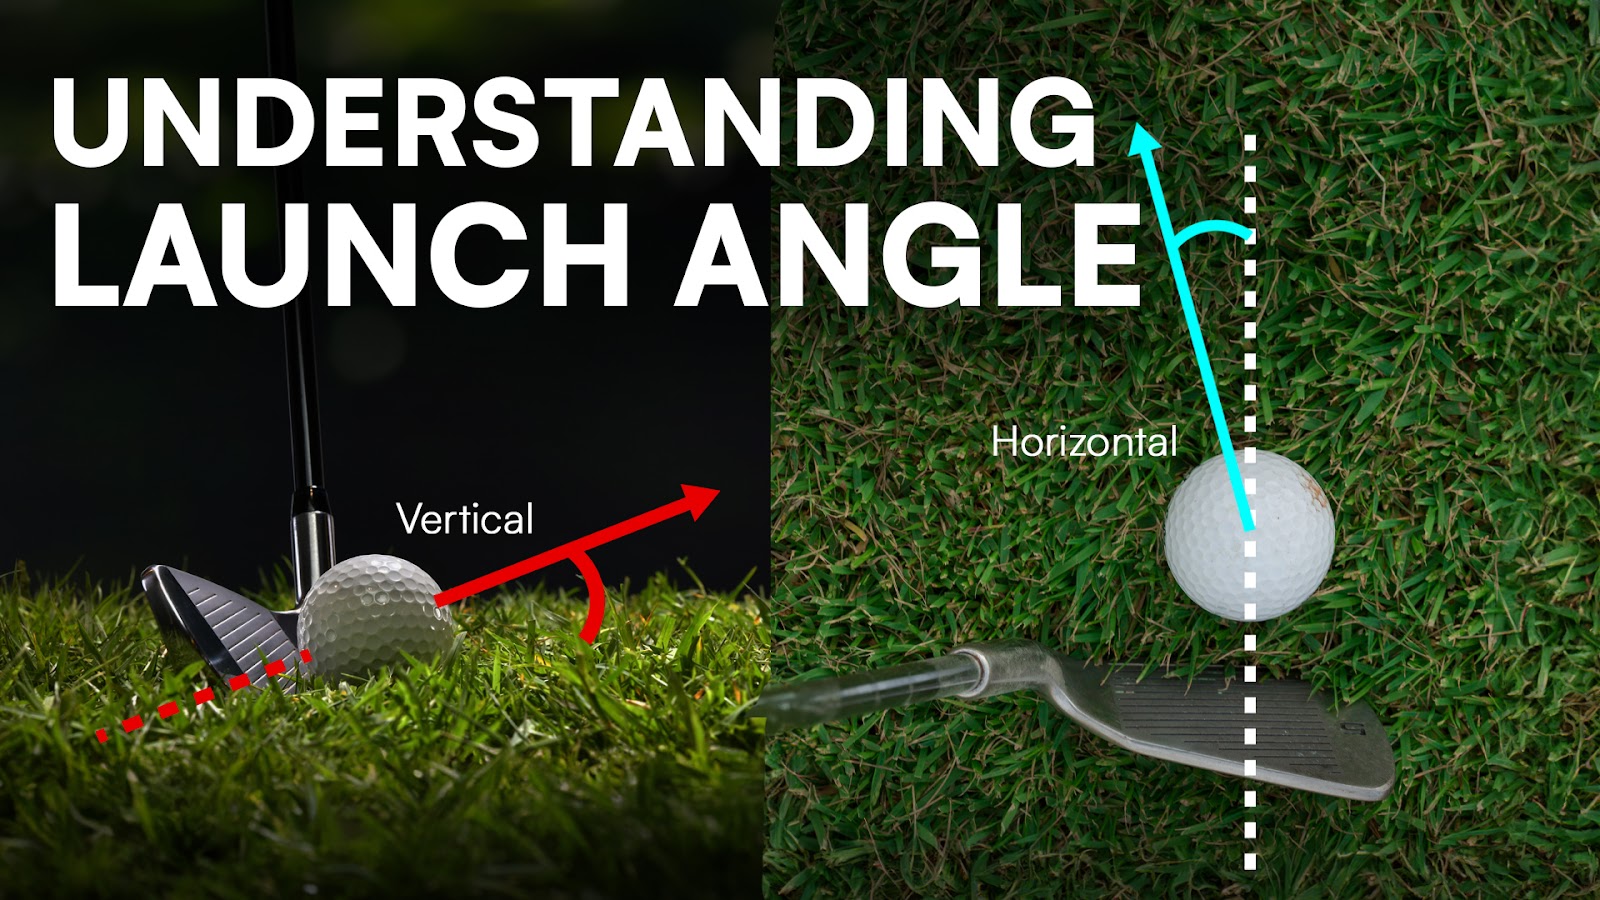 Understanding launch angle with launch monitors